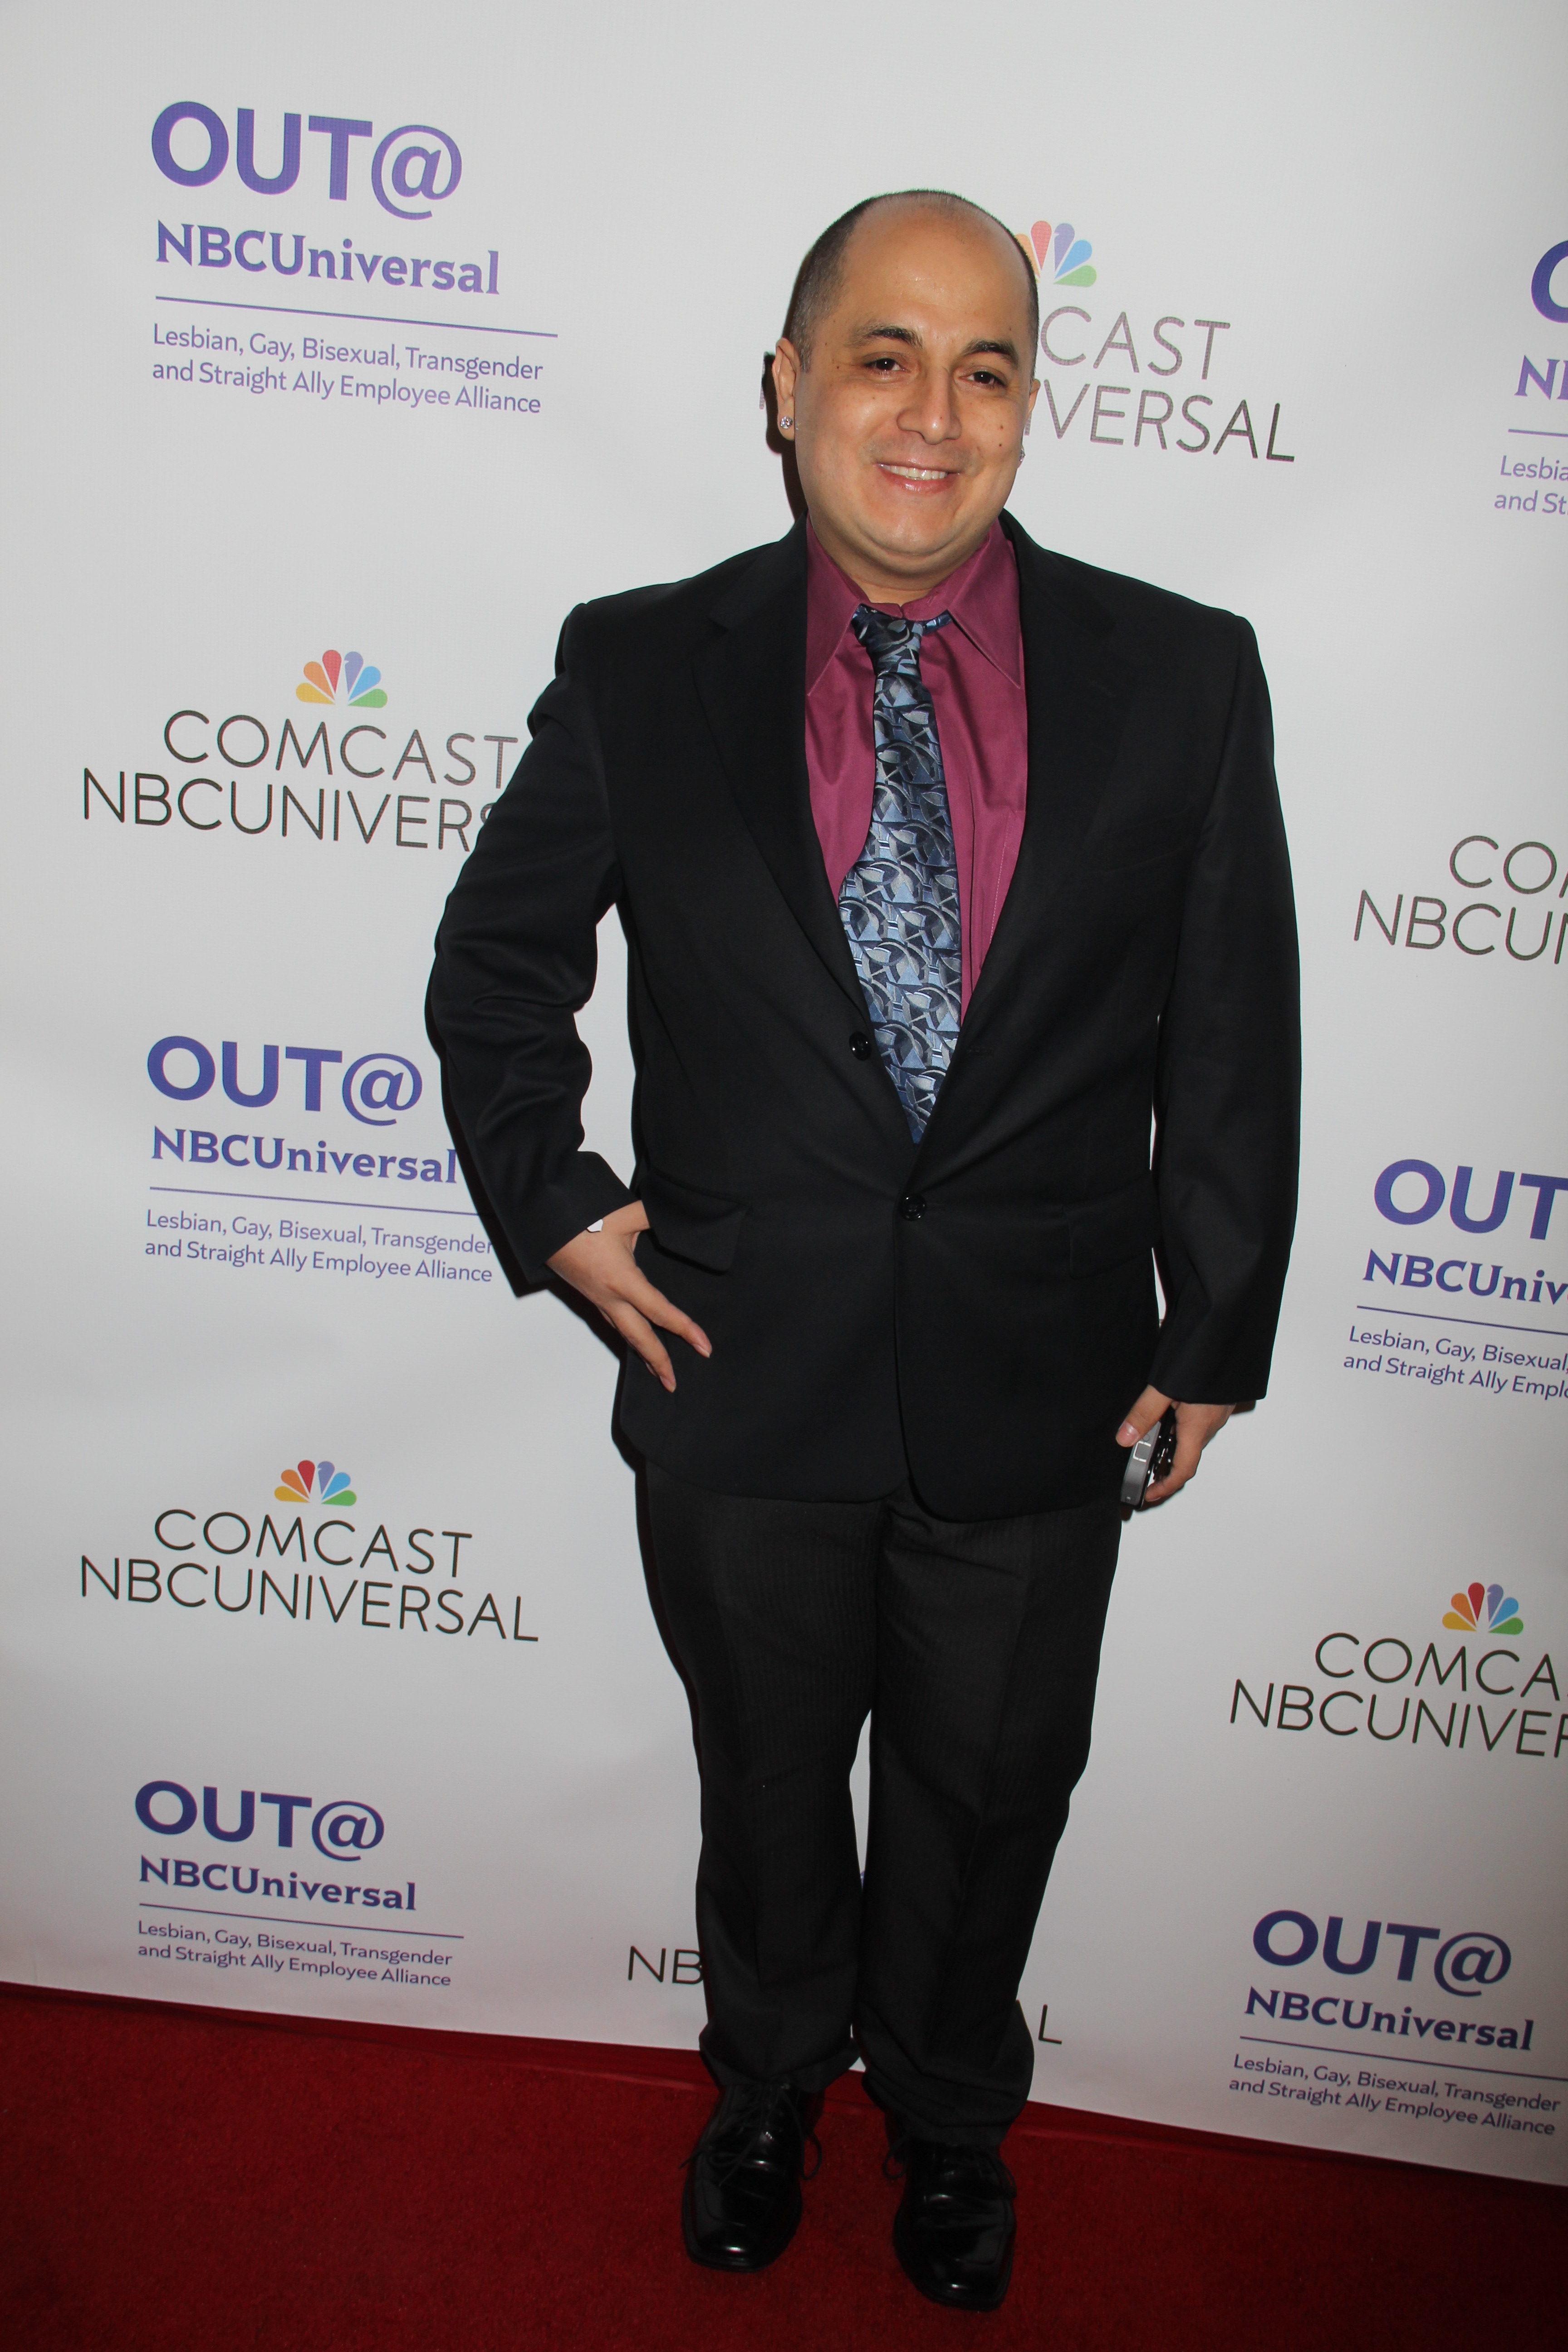 Steven Escobar, President & Executive Editor-In-Chief of Diversity News Magazine Arrives at OUT@NBCUniversal 10 Years Anniversary at The Abbey Food & Bar in West Hollywood, CA on 2-24-2015